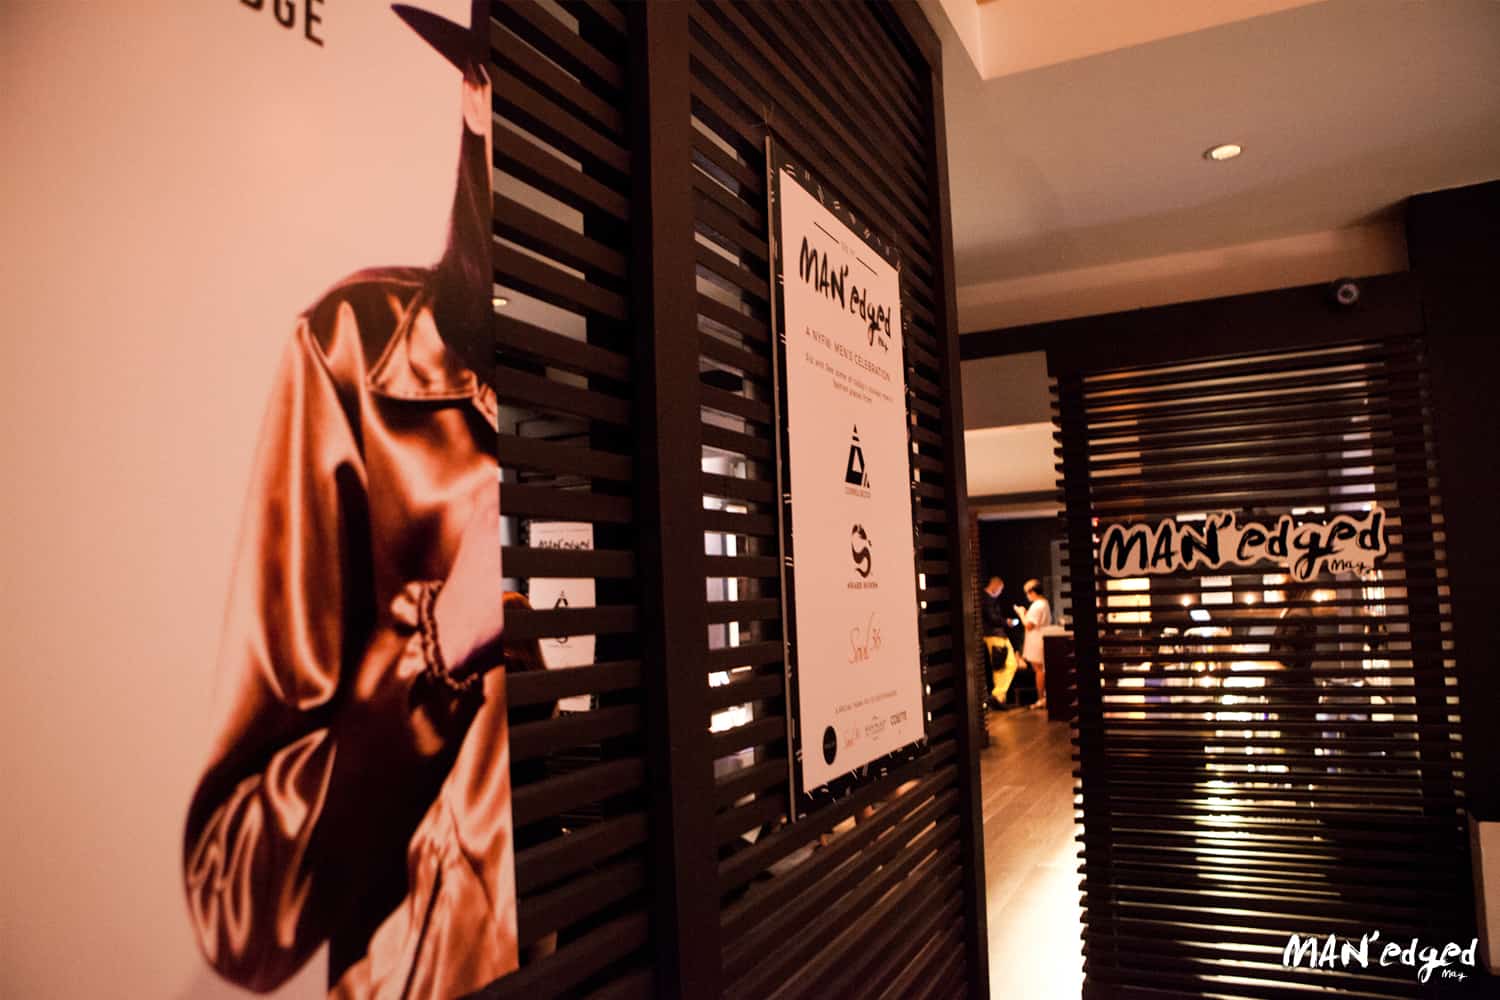 NYFWM MAN'edged Magazine event signage and ambiance at Parlor